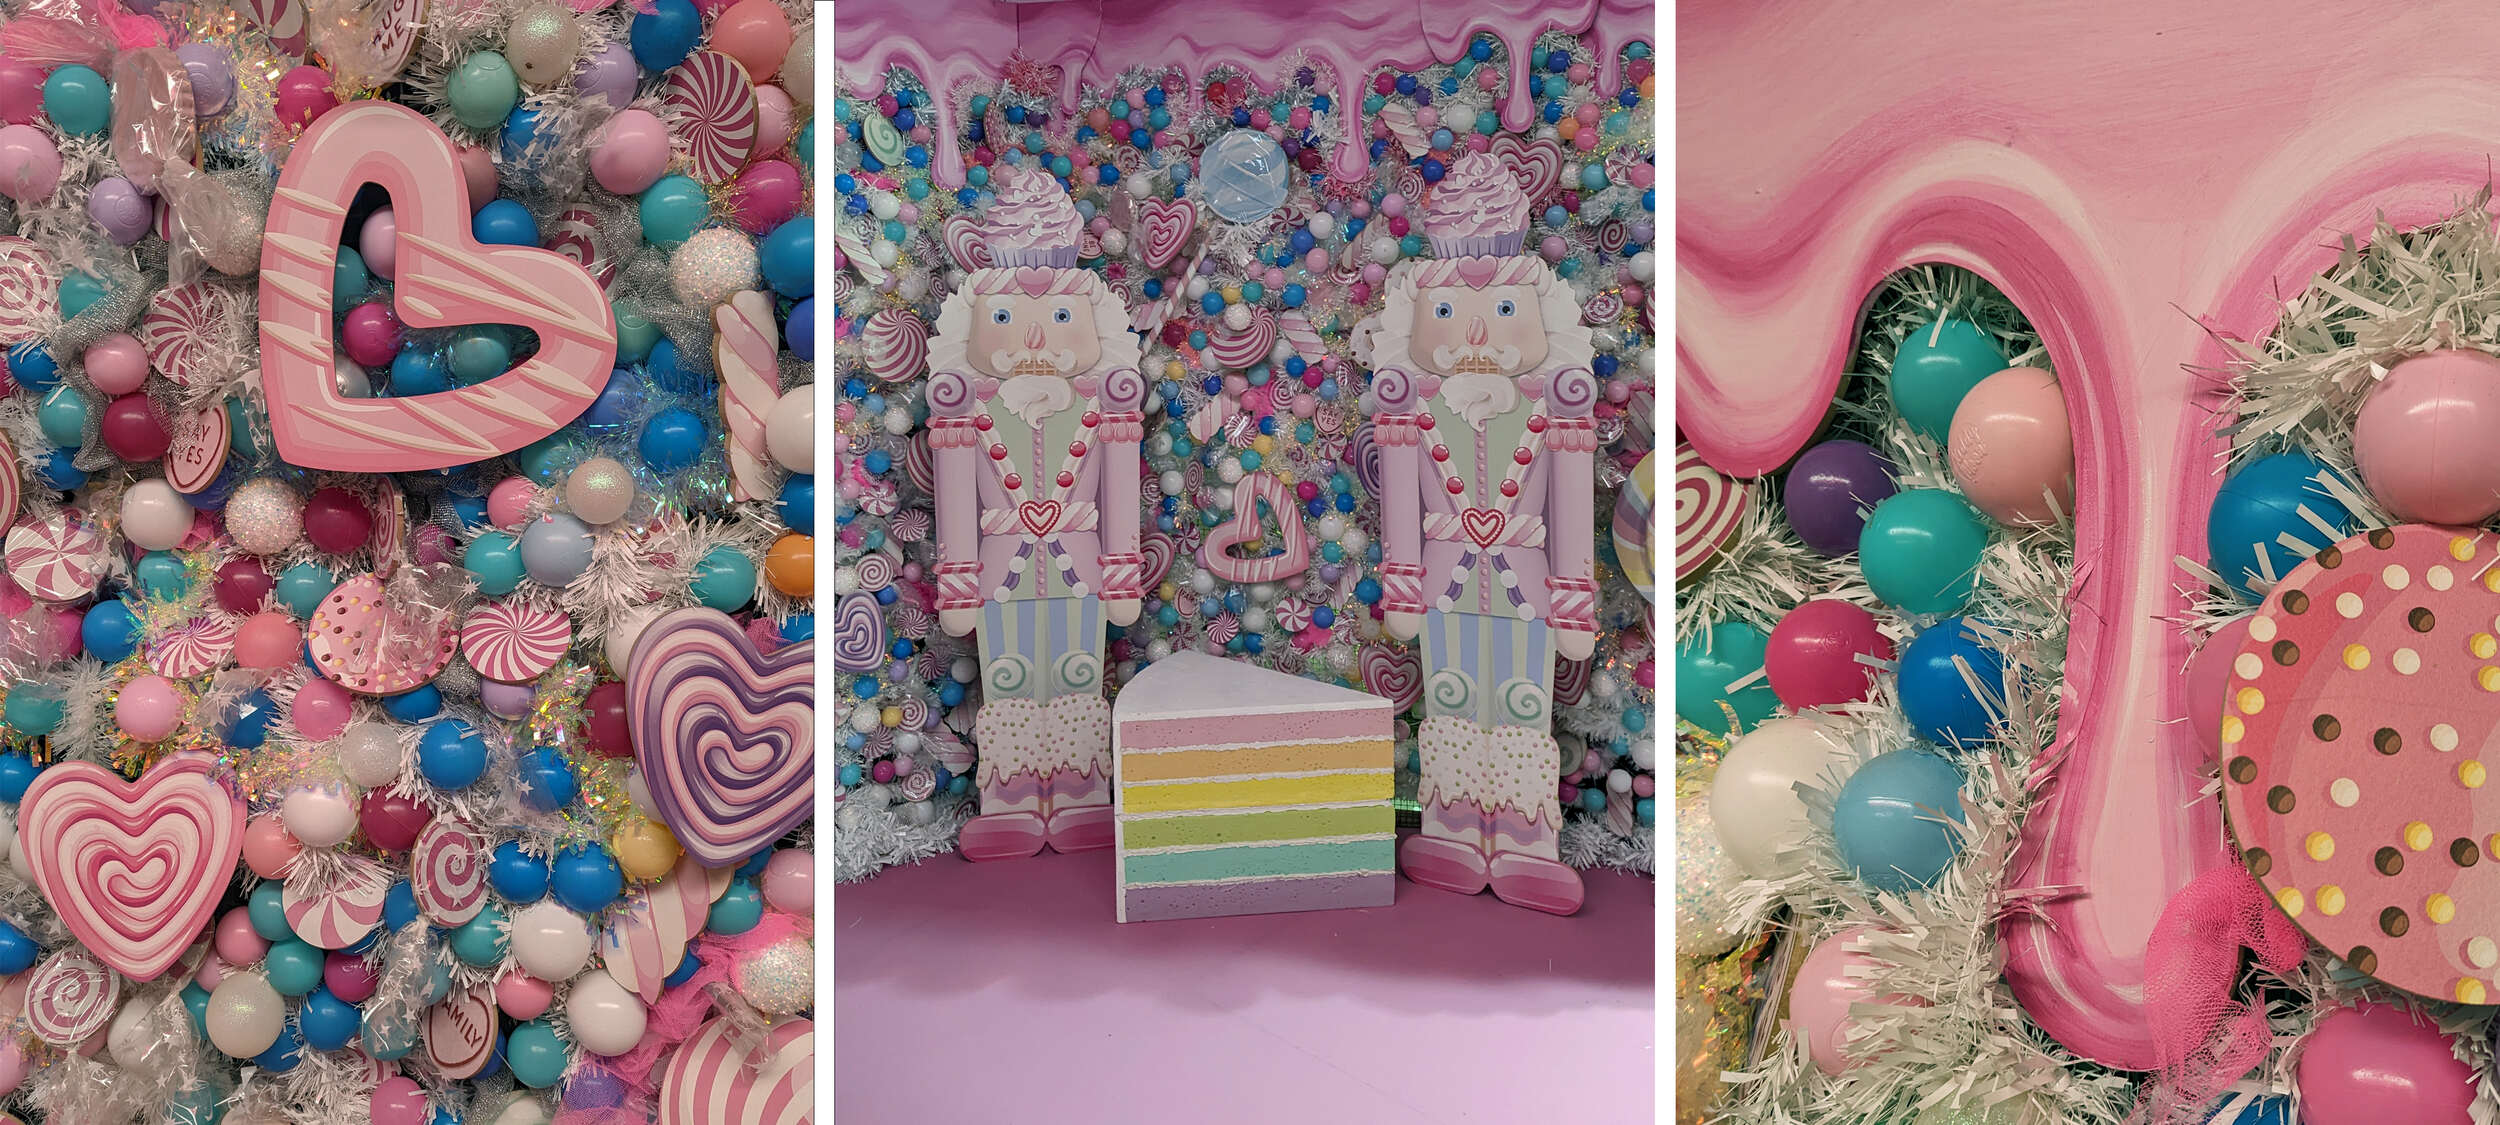 Pastel Candy Exeter SelfieLand